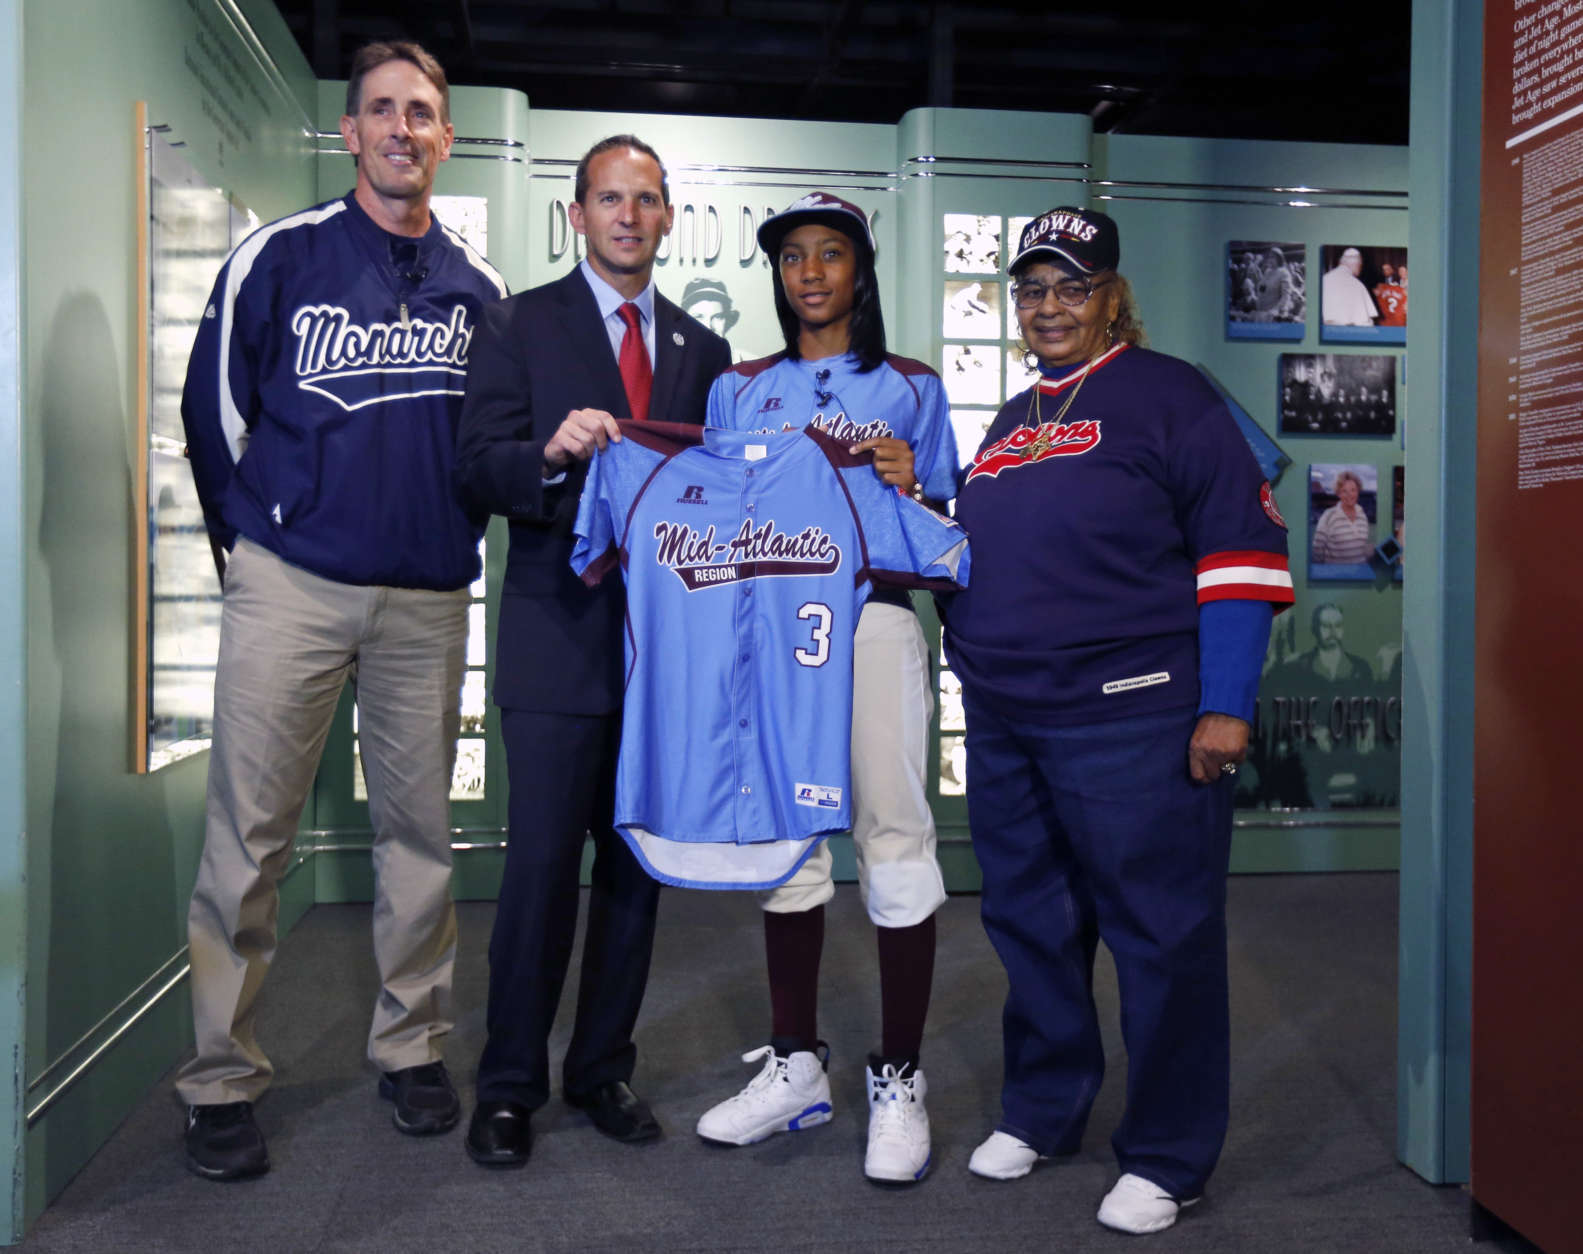 Little League pitcher Mo'ne Davis, second from right, presents the jersey she wore during her shutout win at the Little League World Series to Baseball Hall of Fame President Jeff Idelson  during a ceremony at the hall on Thursday, Sept. 25, 2014, in Cooperstown, N.Y. Also pictured are Steve Bandura, left, who runs the Anderson Monarchs baseball program and Mamie "Peanut" Johnson, who pitched in the Negro Leagues. (AP Photo/Mike Groll)